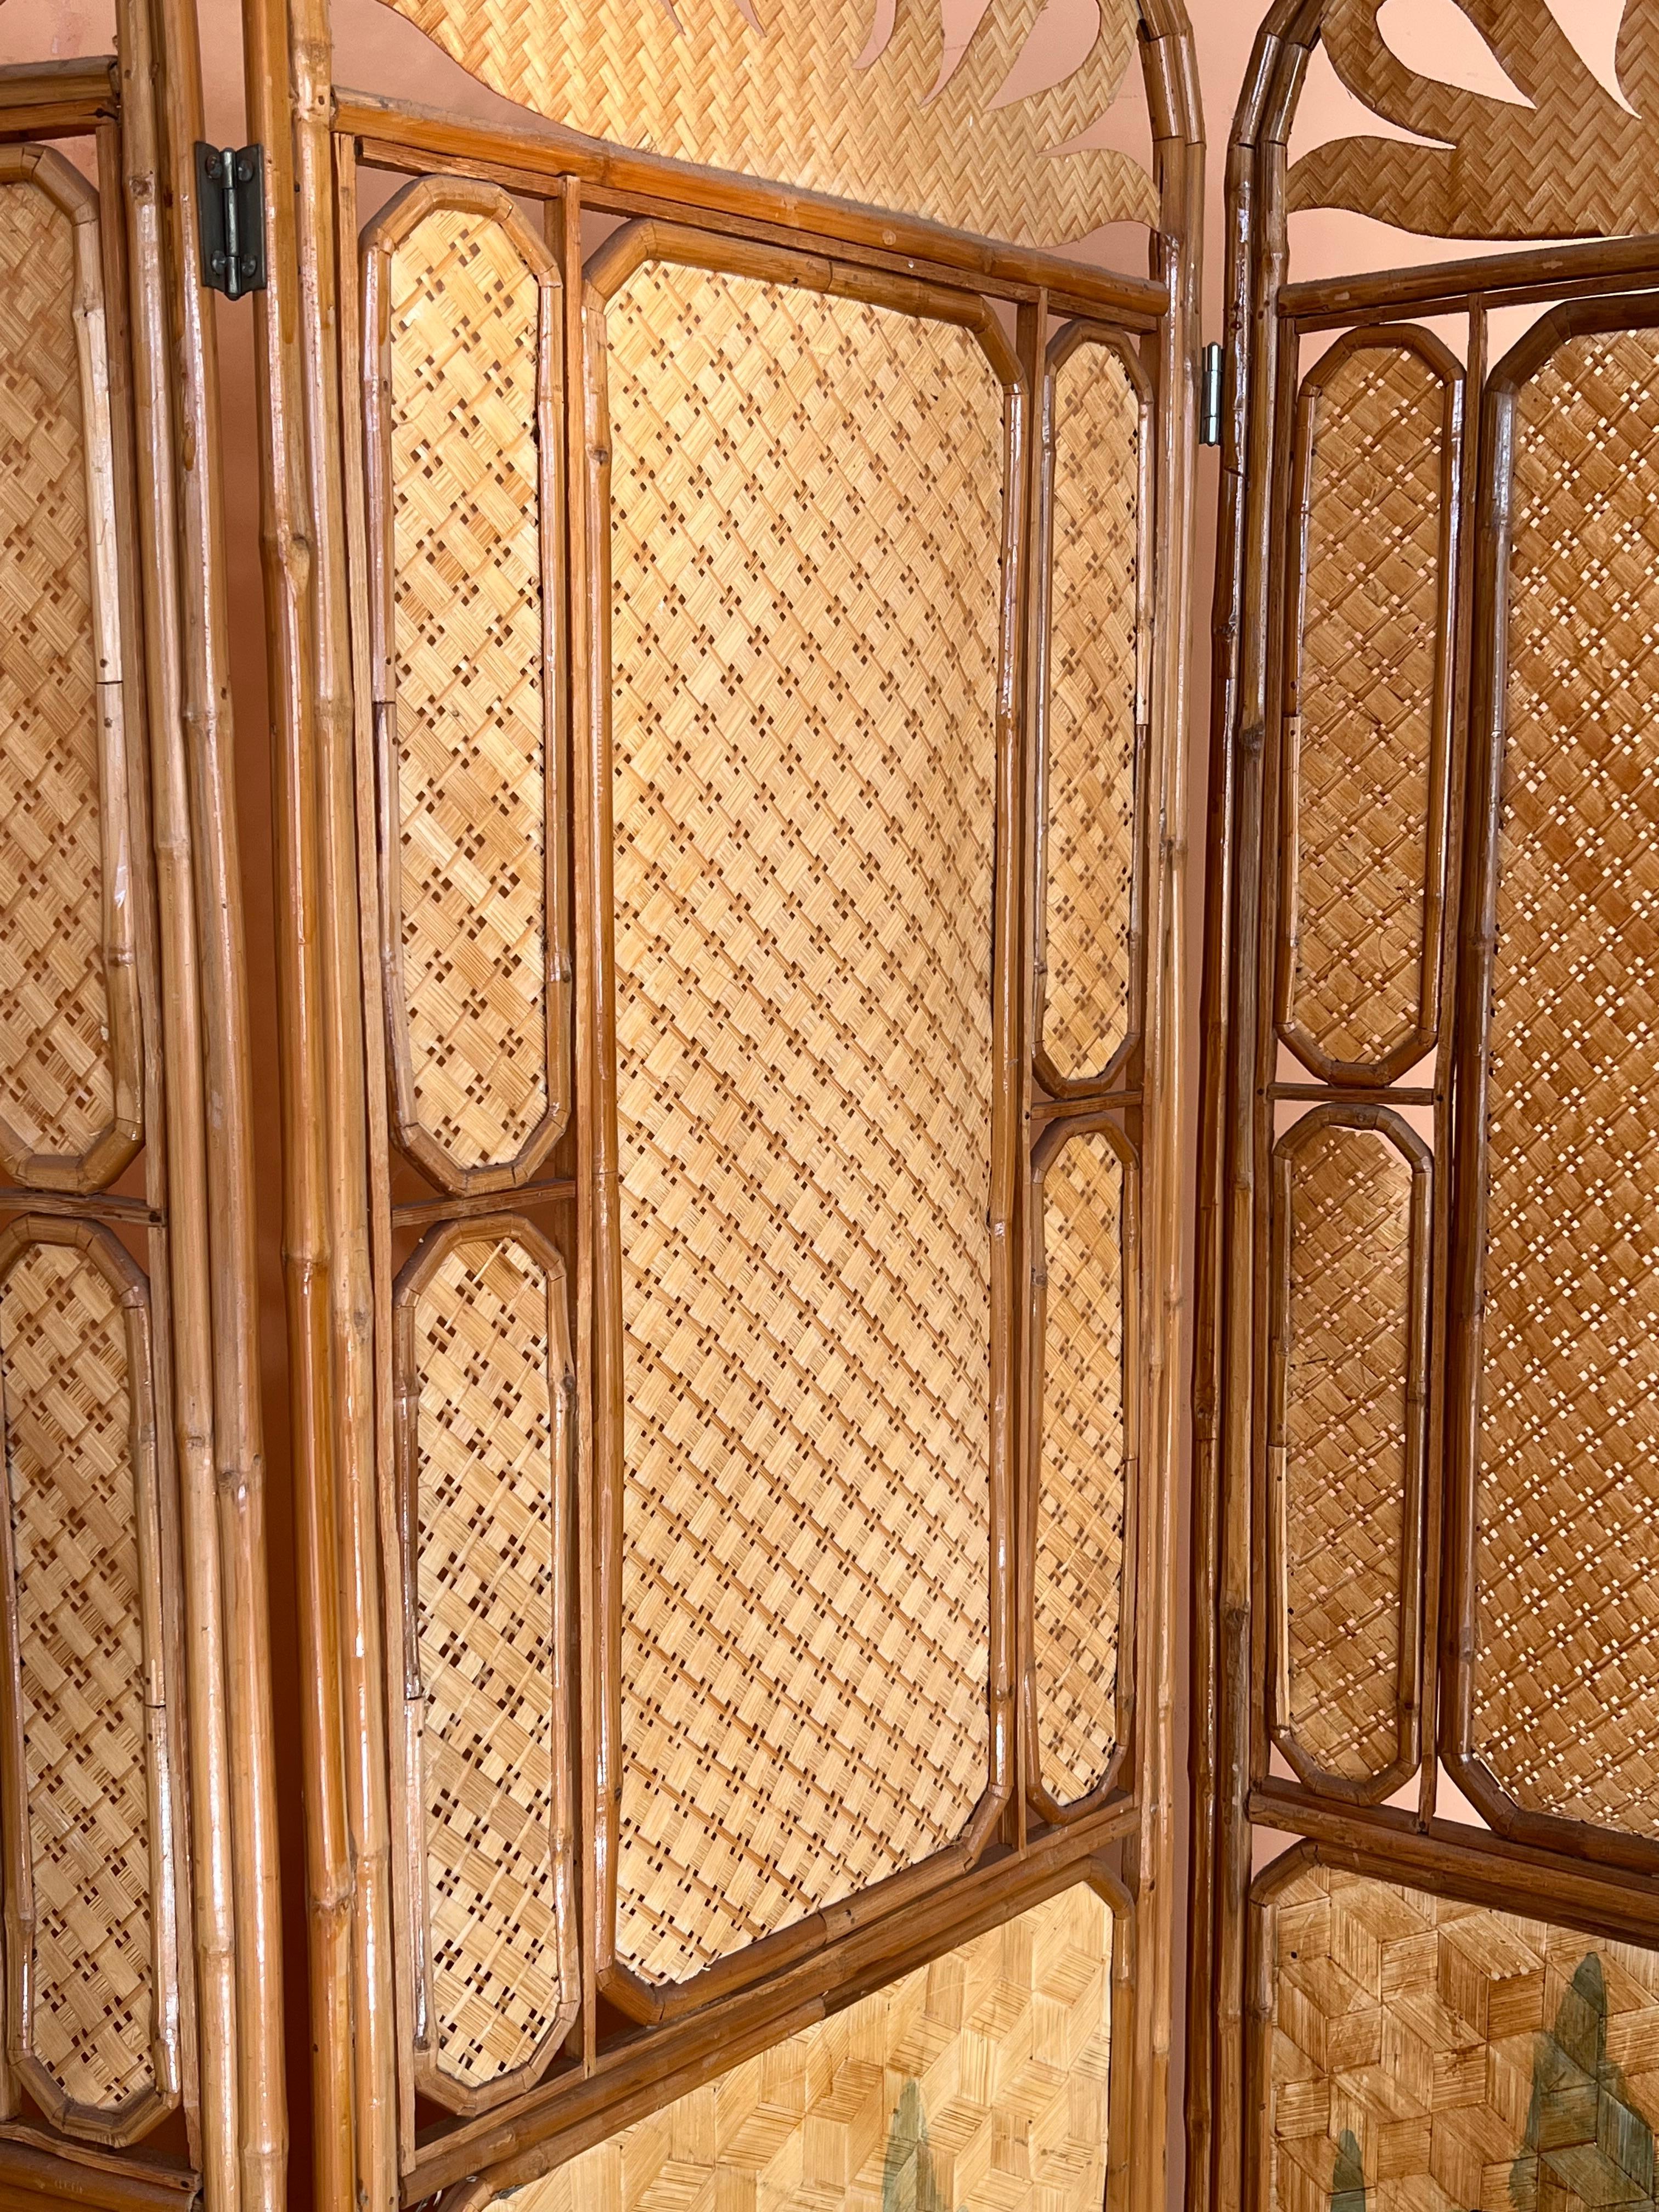 Sculptural Three-Panel Folding Screen Room Divider in Rattan and Wicker, 1960s For Sale 1